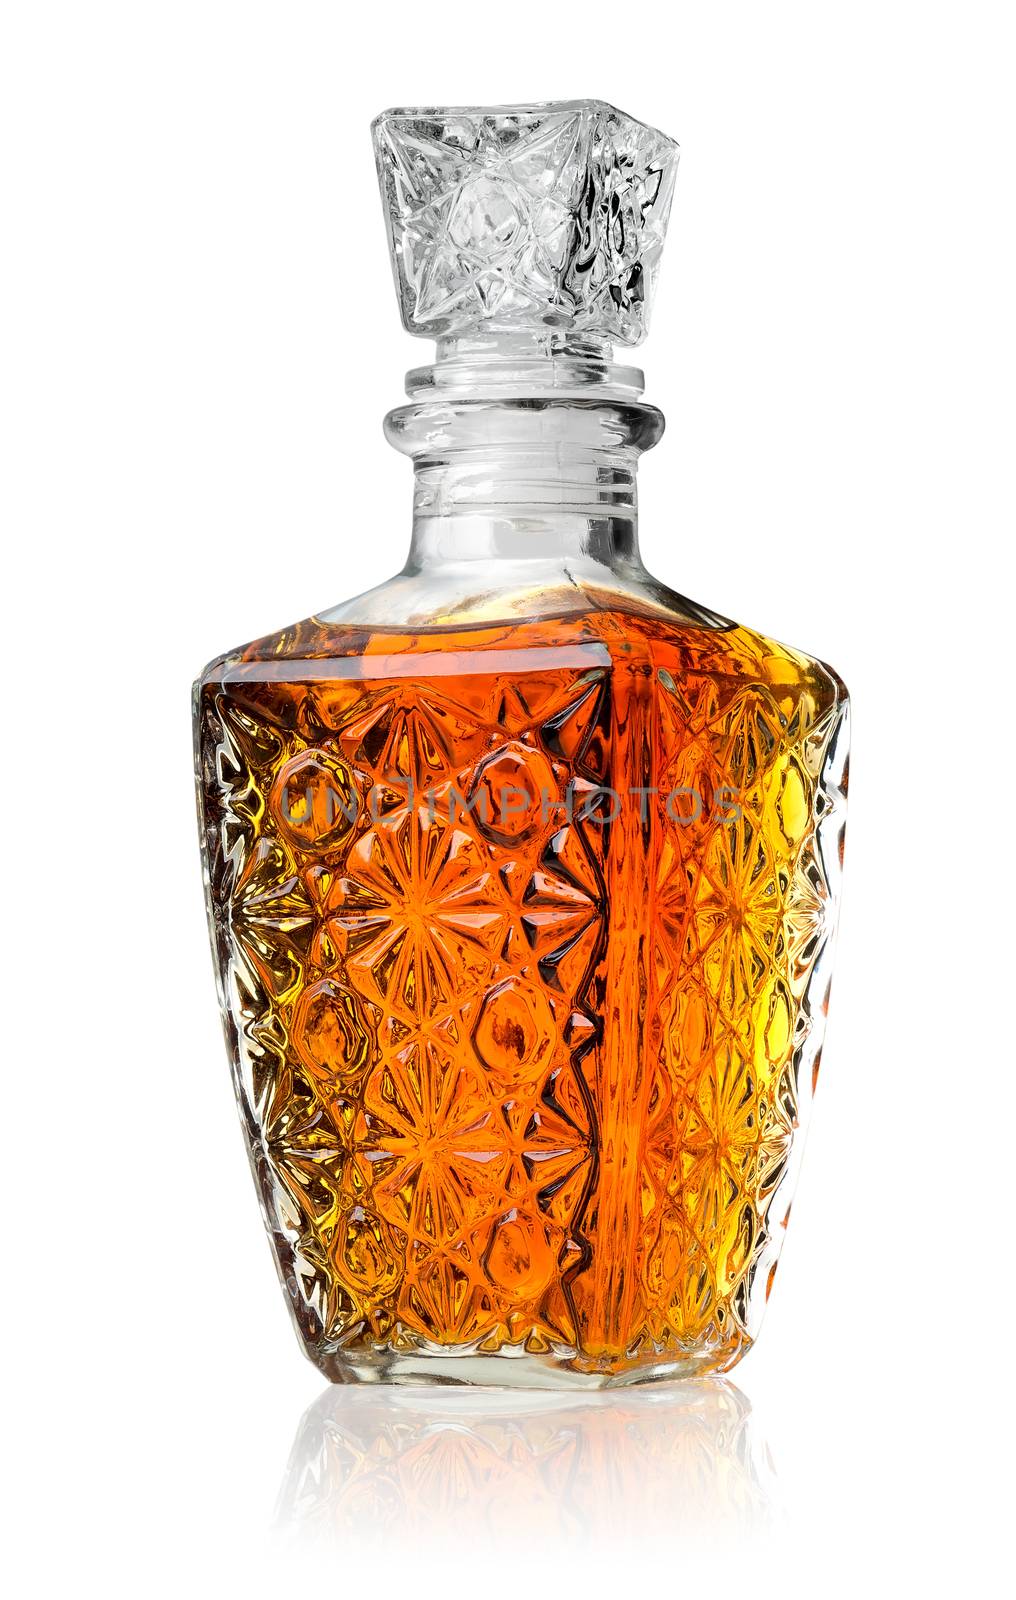 Crystal decanter with cognac by Givaga